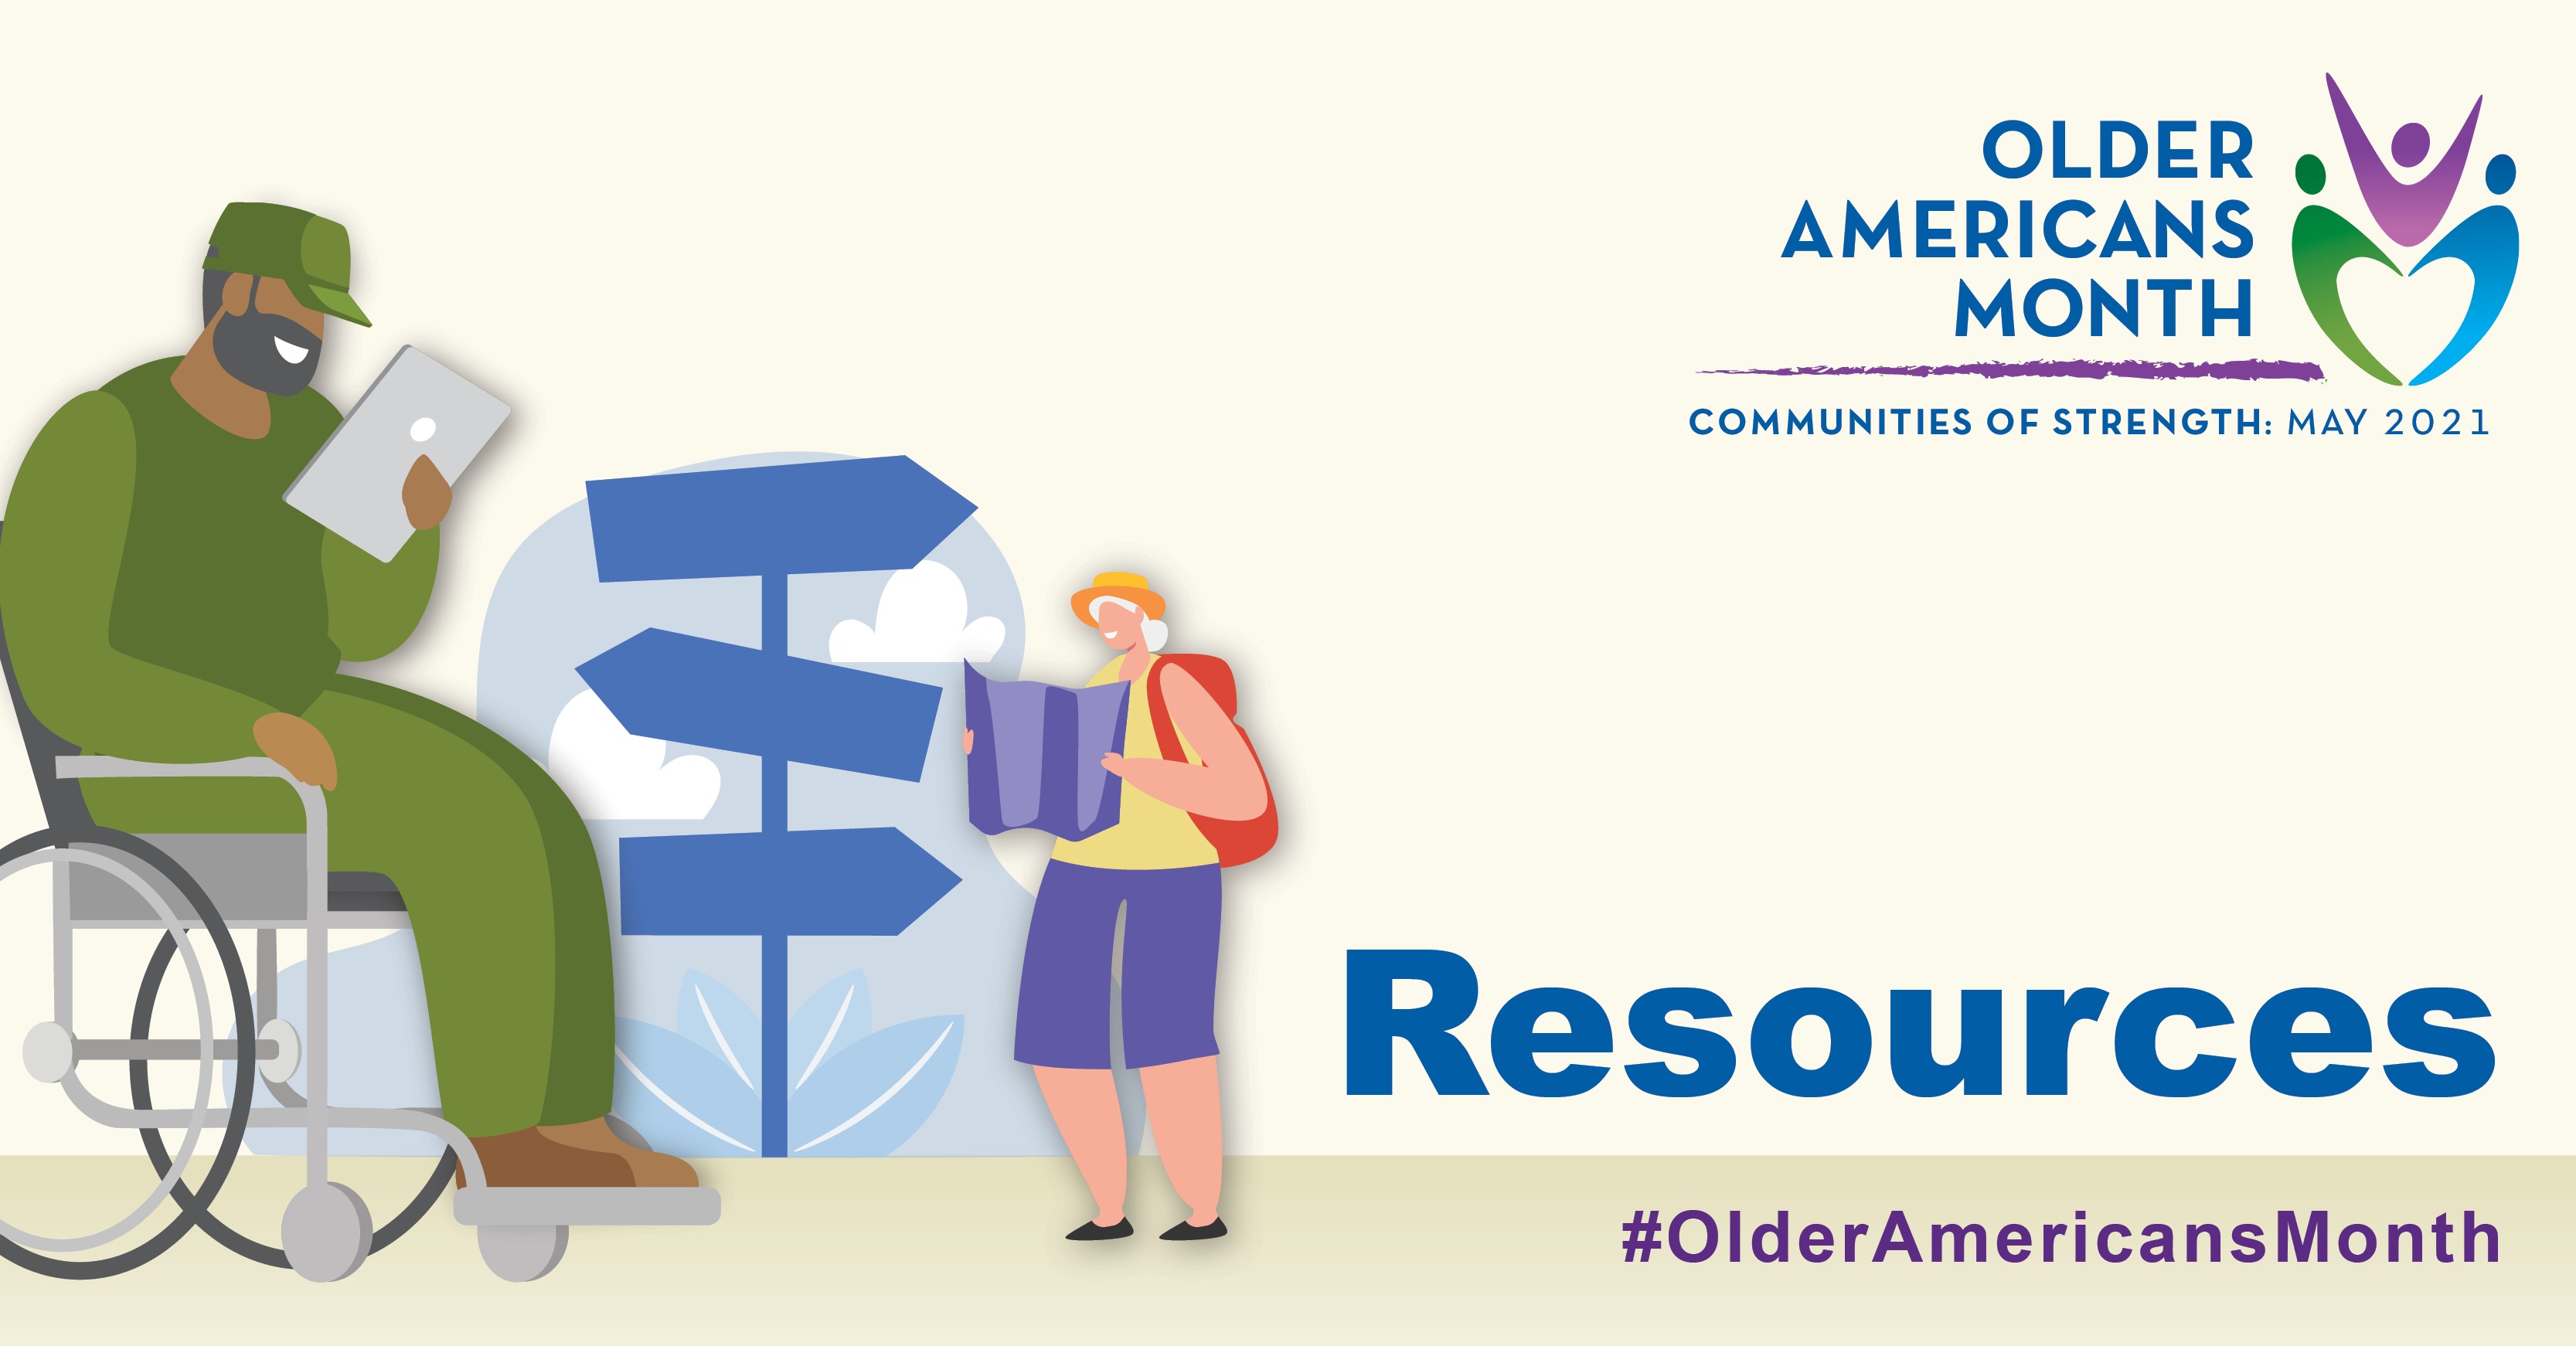 Social Media Graphic: Older Americans Month, Communities of Strength: May 2021. Resources #OlderAmericansMonth